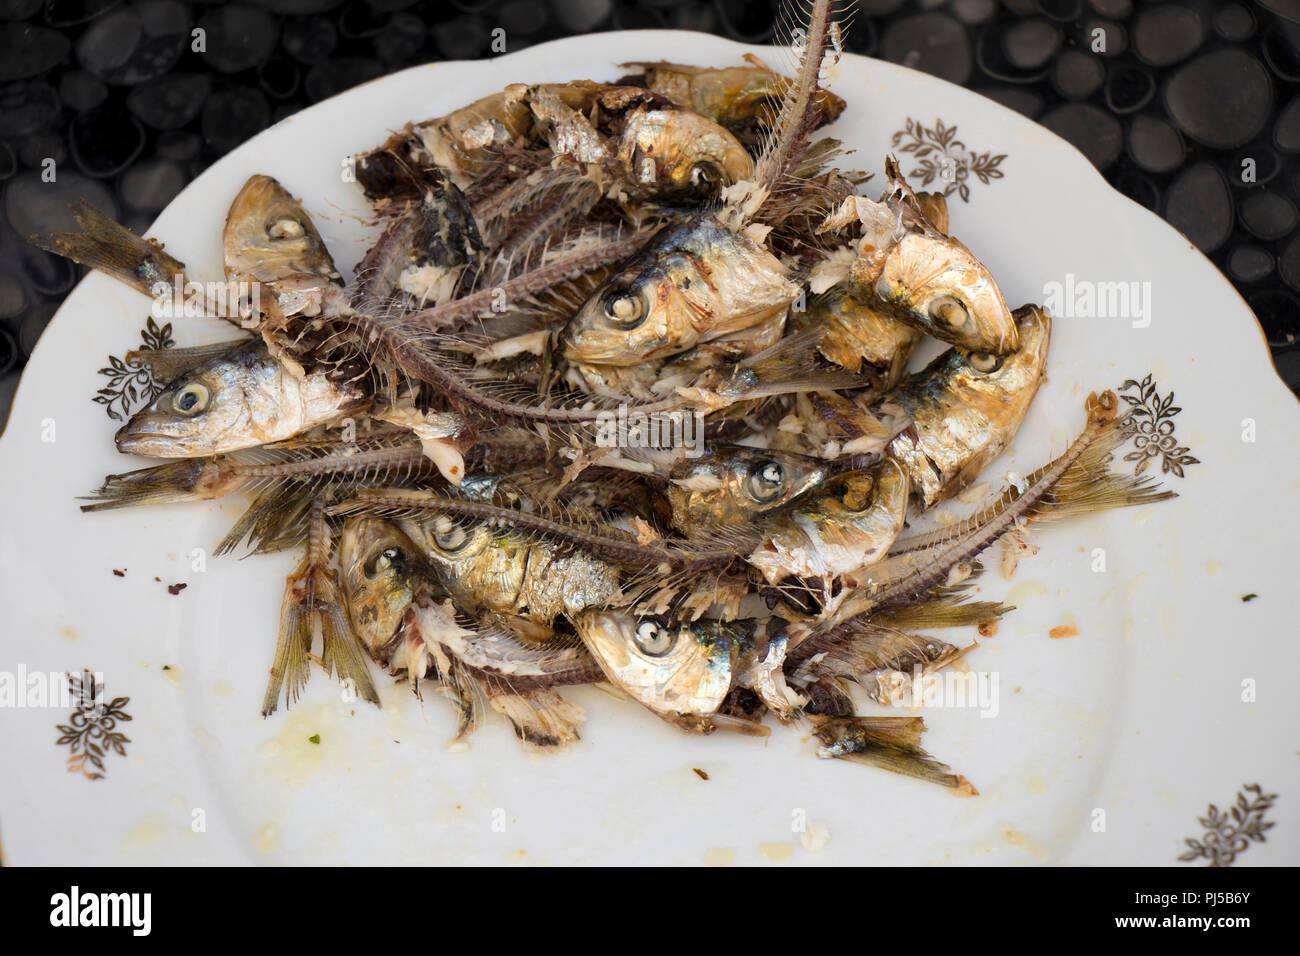 Dozen of home prepared eaten grilled sardines heads and bones, very healthy, tasty and cheap Mediterranean fish , a rich meal for the poor Stock Photo